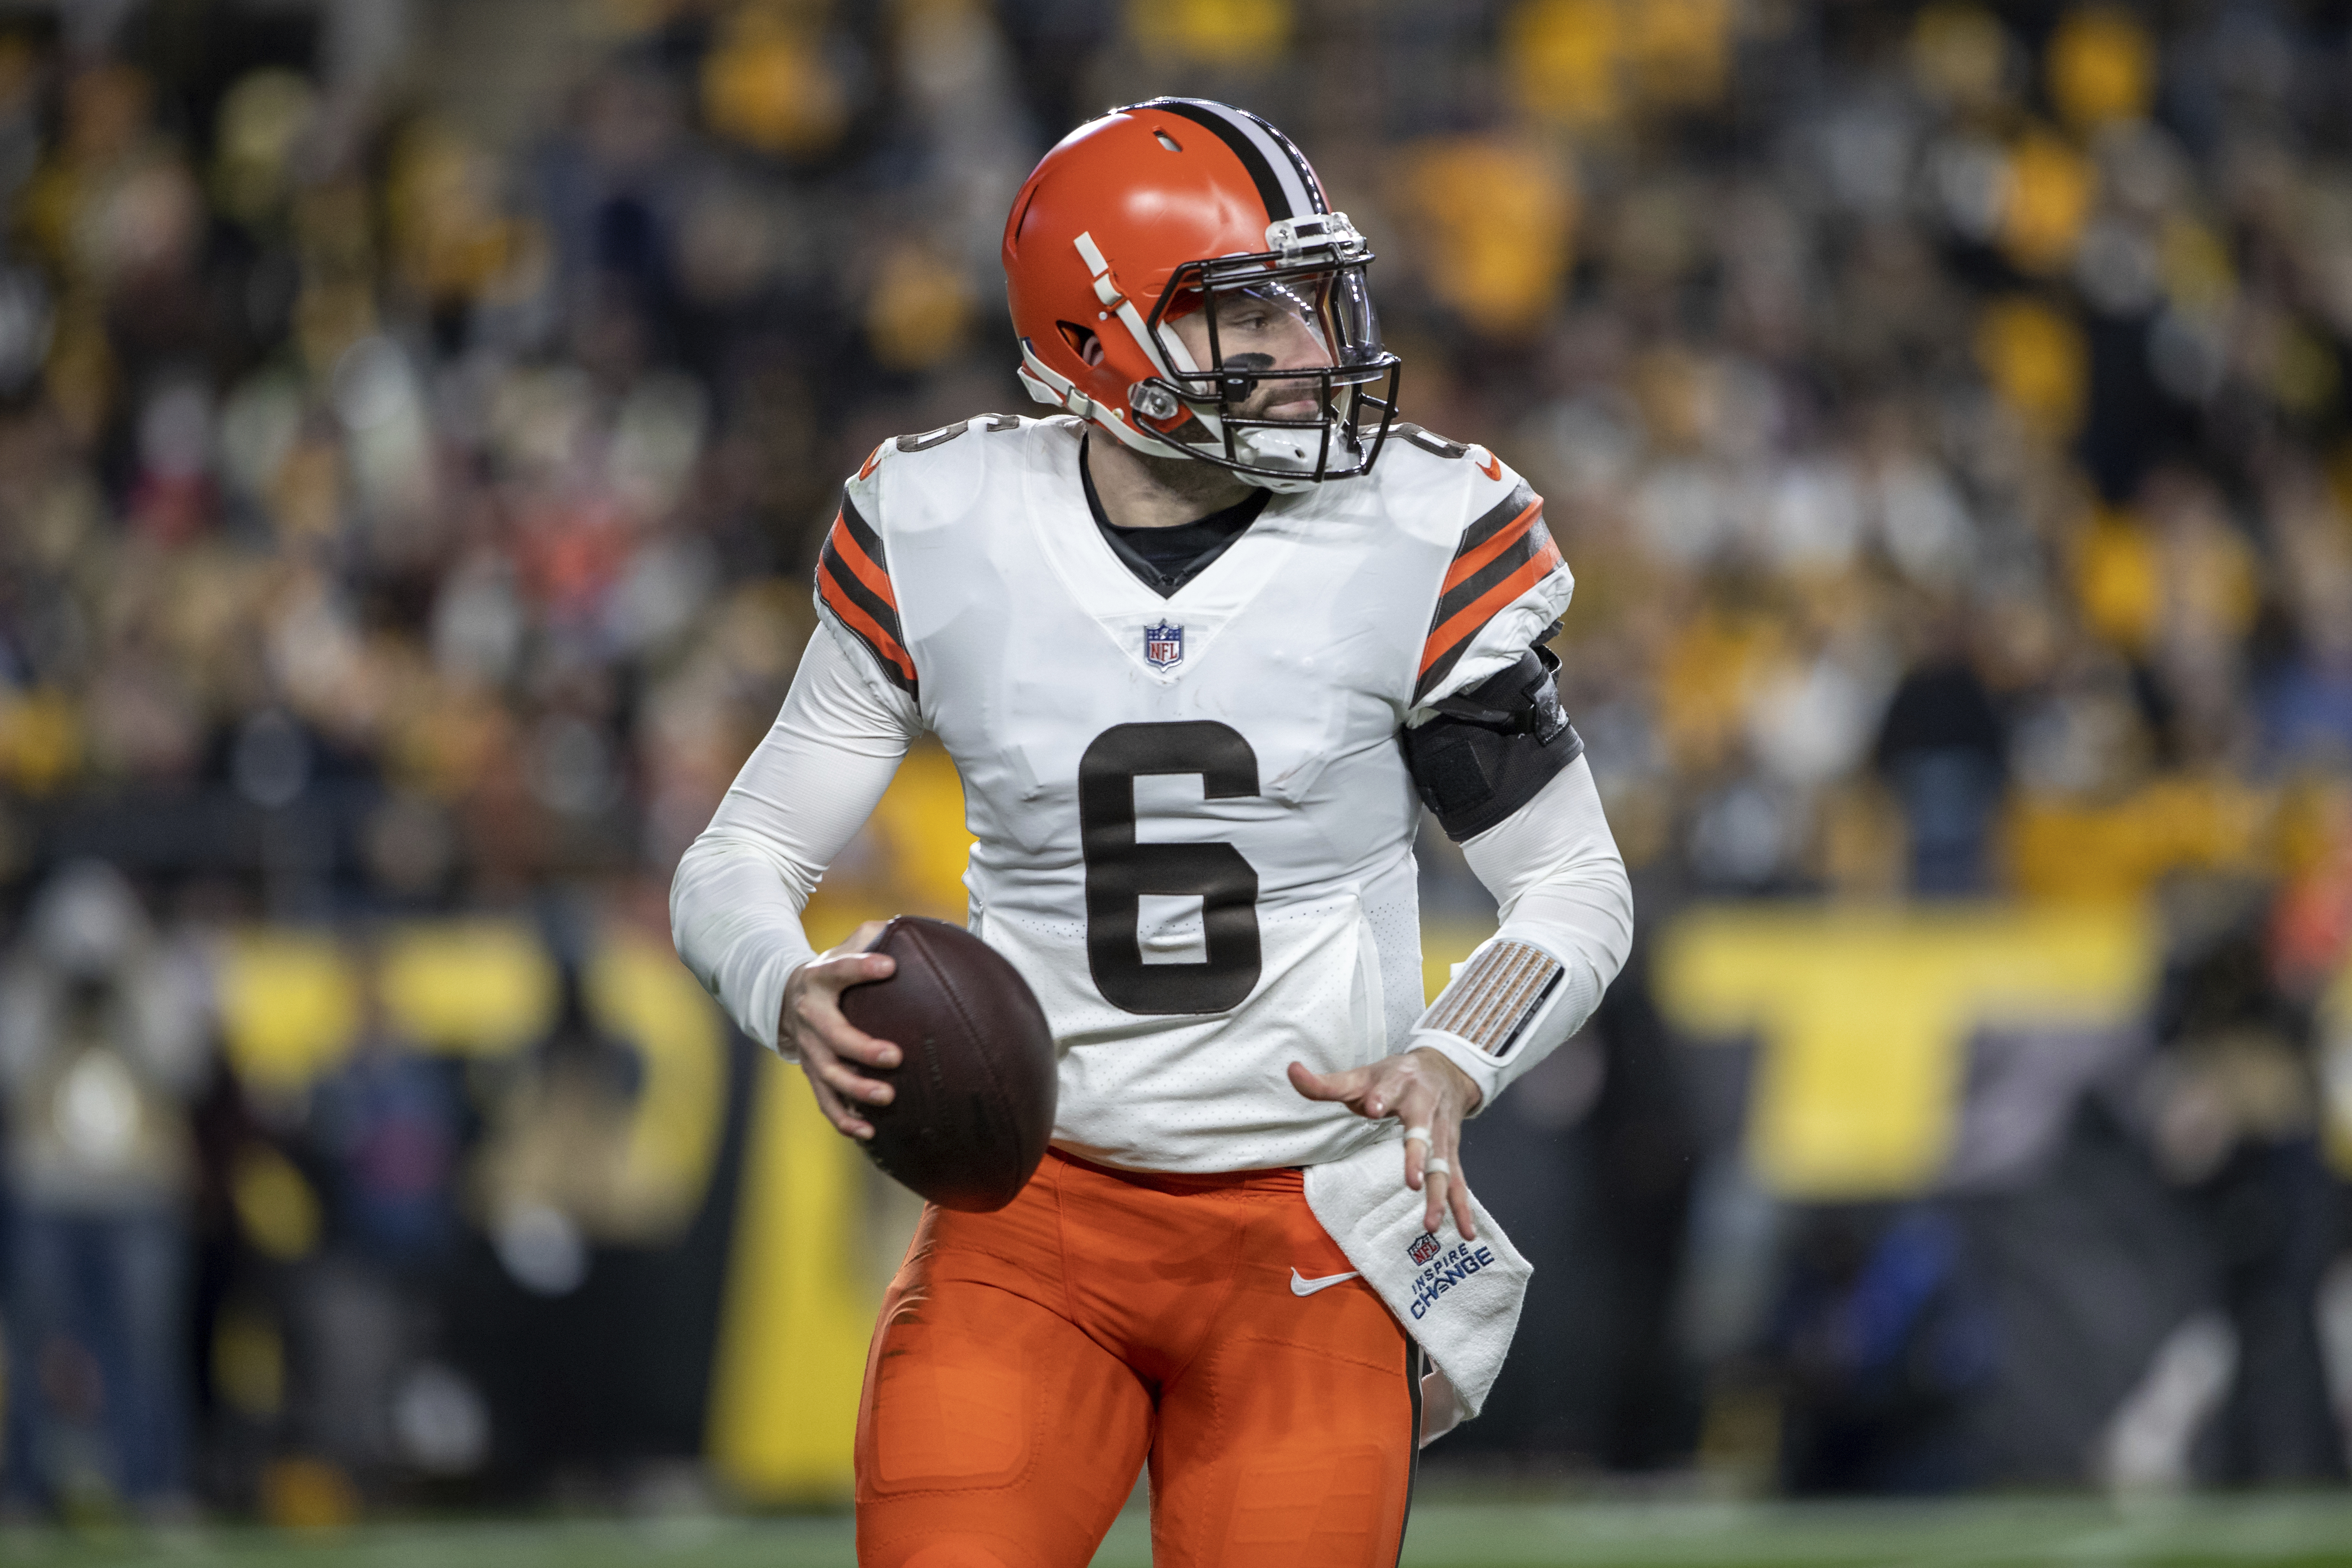 NFL rumors: Baker Mayfield to Steelers if Browns QB hits free agency